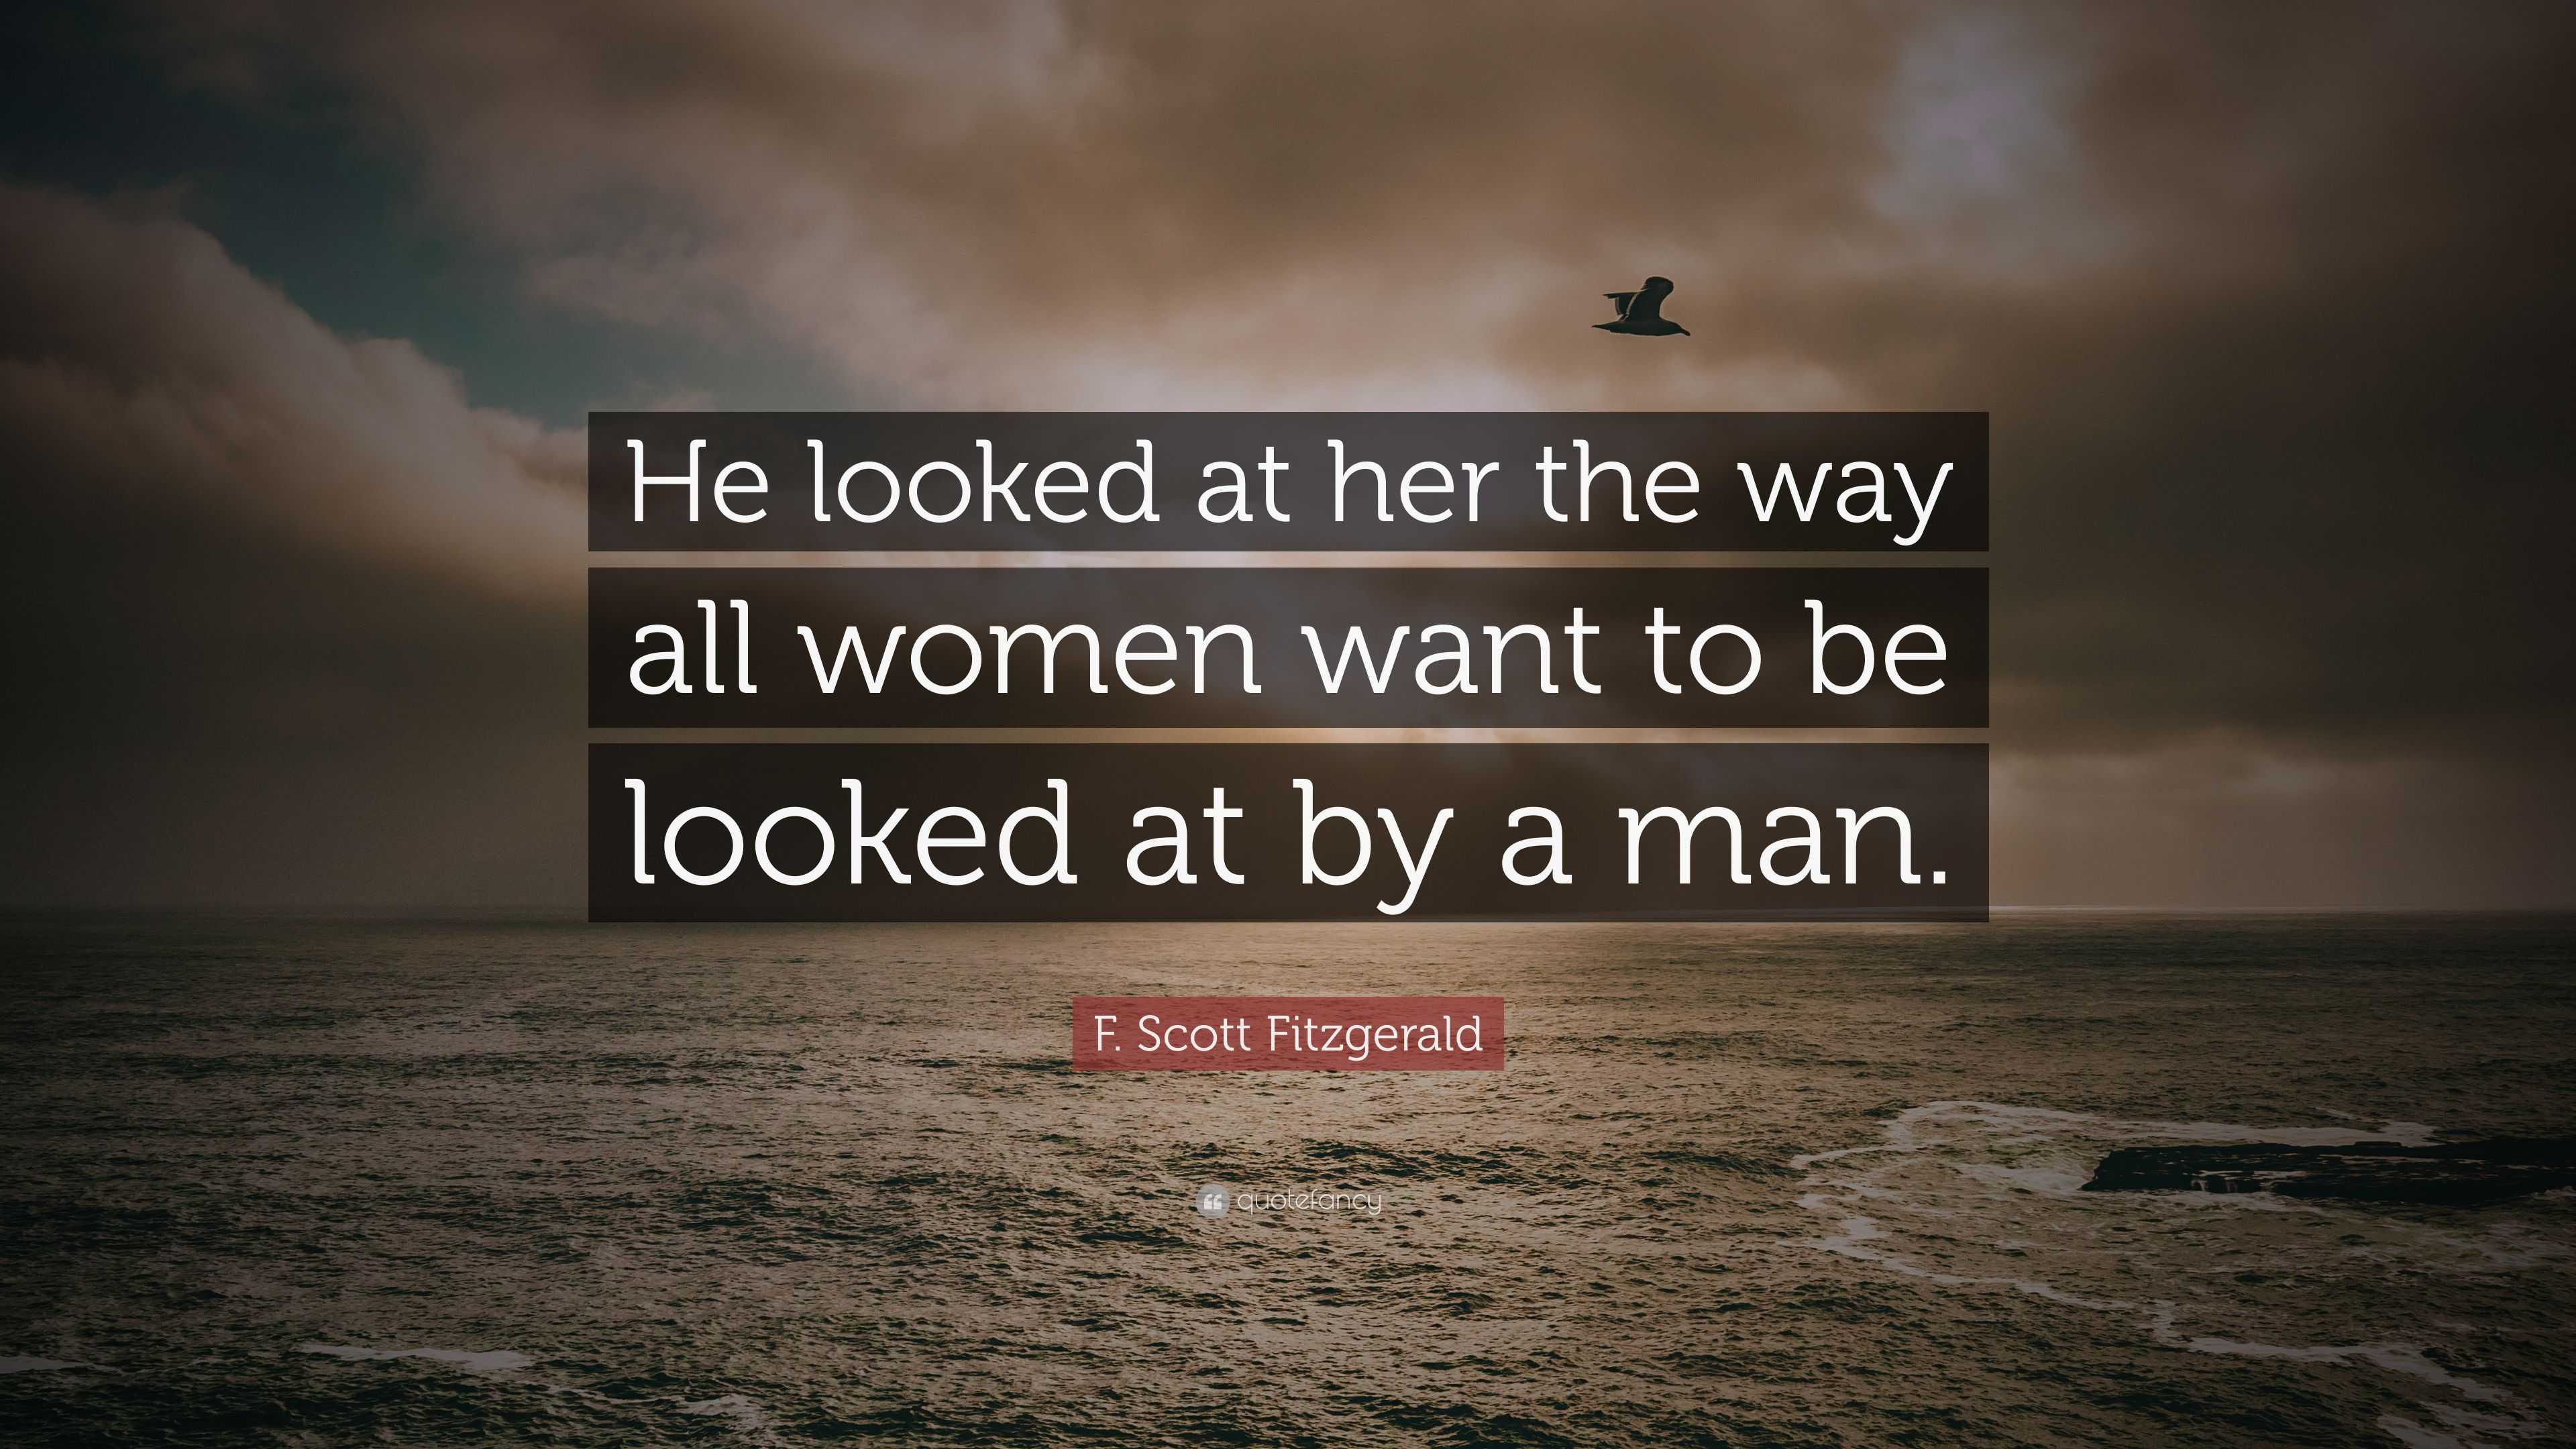 F. Scott Fitzgerald Quote: “He looked at her the way all women want to ...